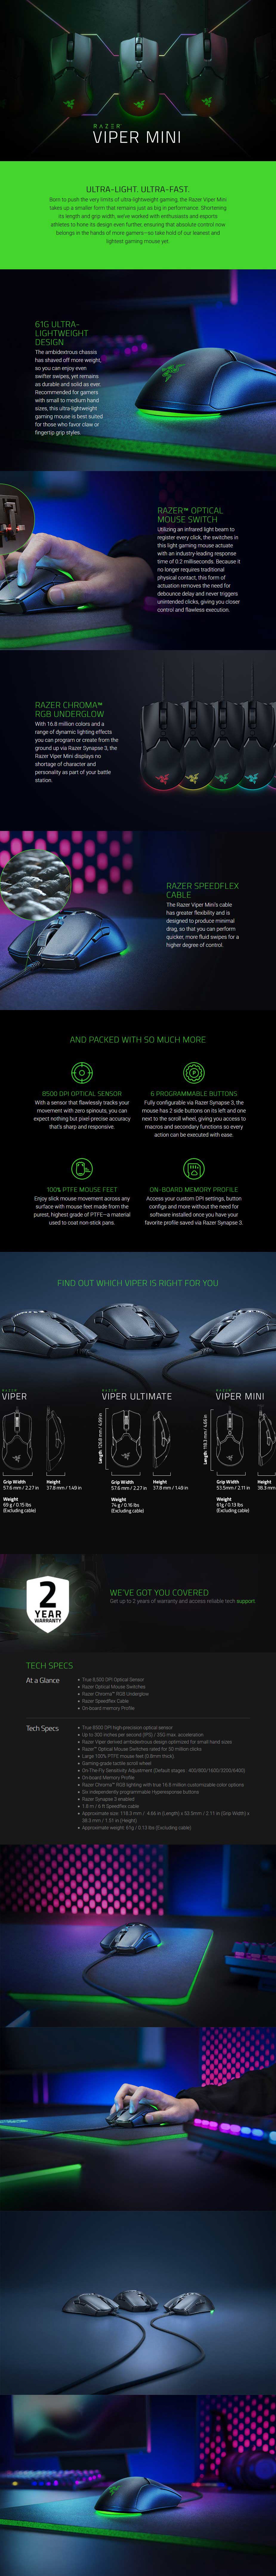 Razer Viper Mini Lightweight Wired Gaming Mouse RZ01-03250100 Details